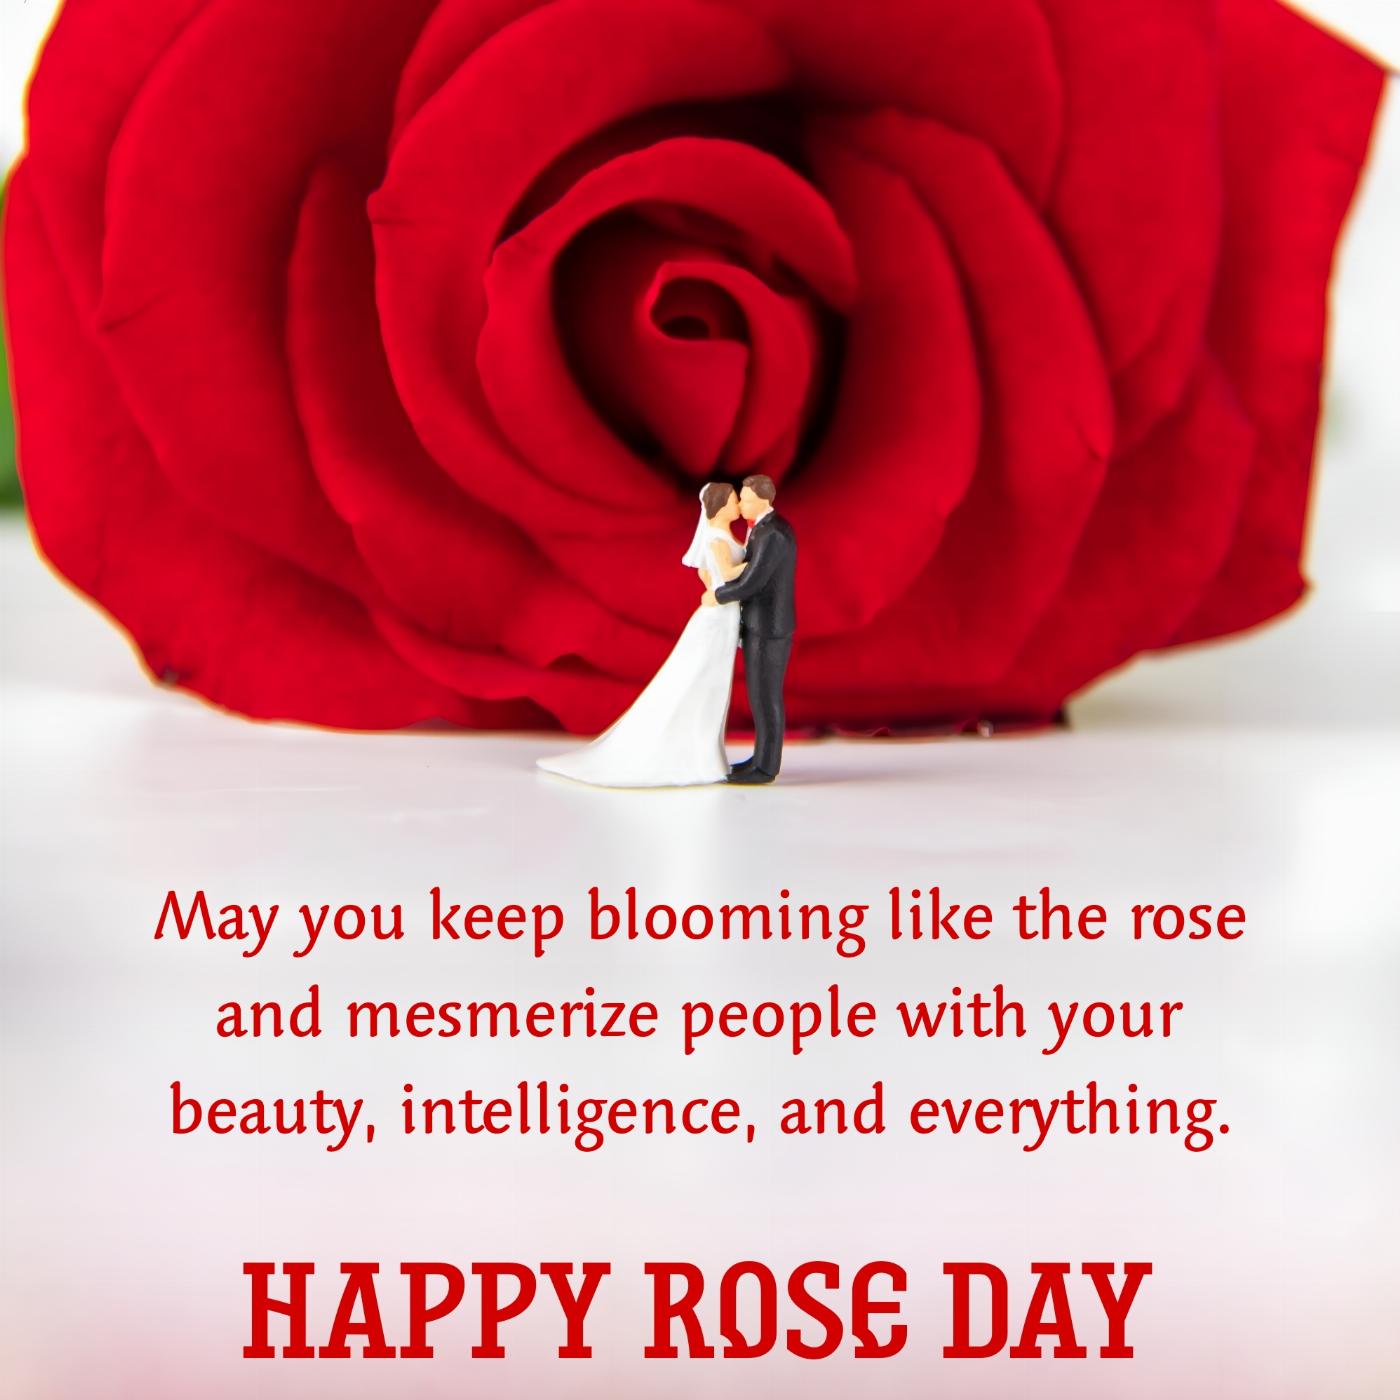 May you keep blooming like the rose and mesmerize